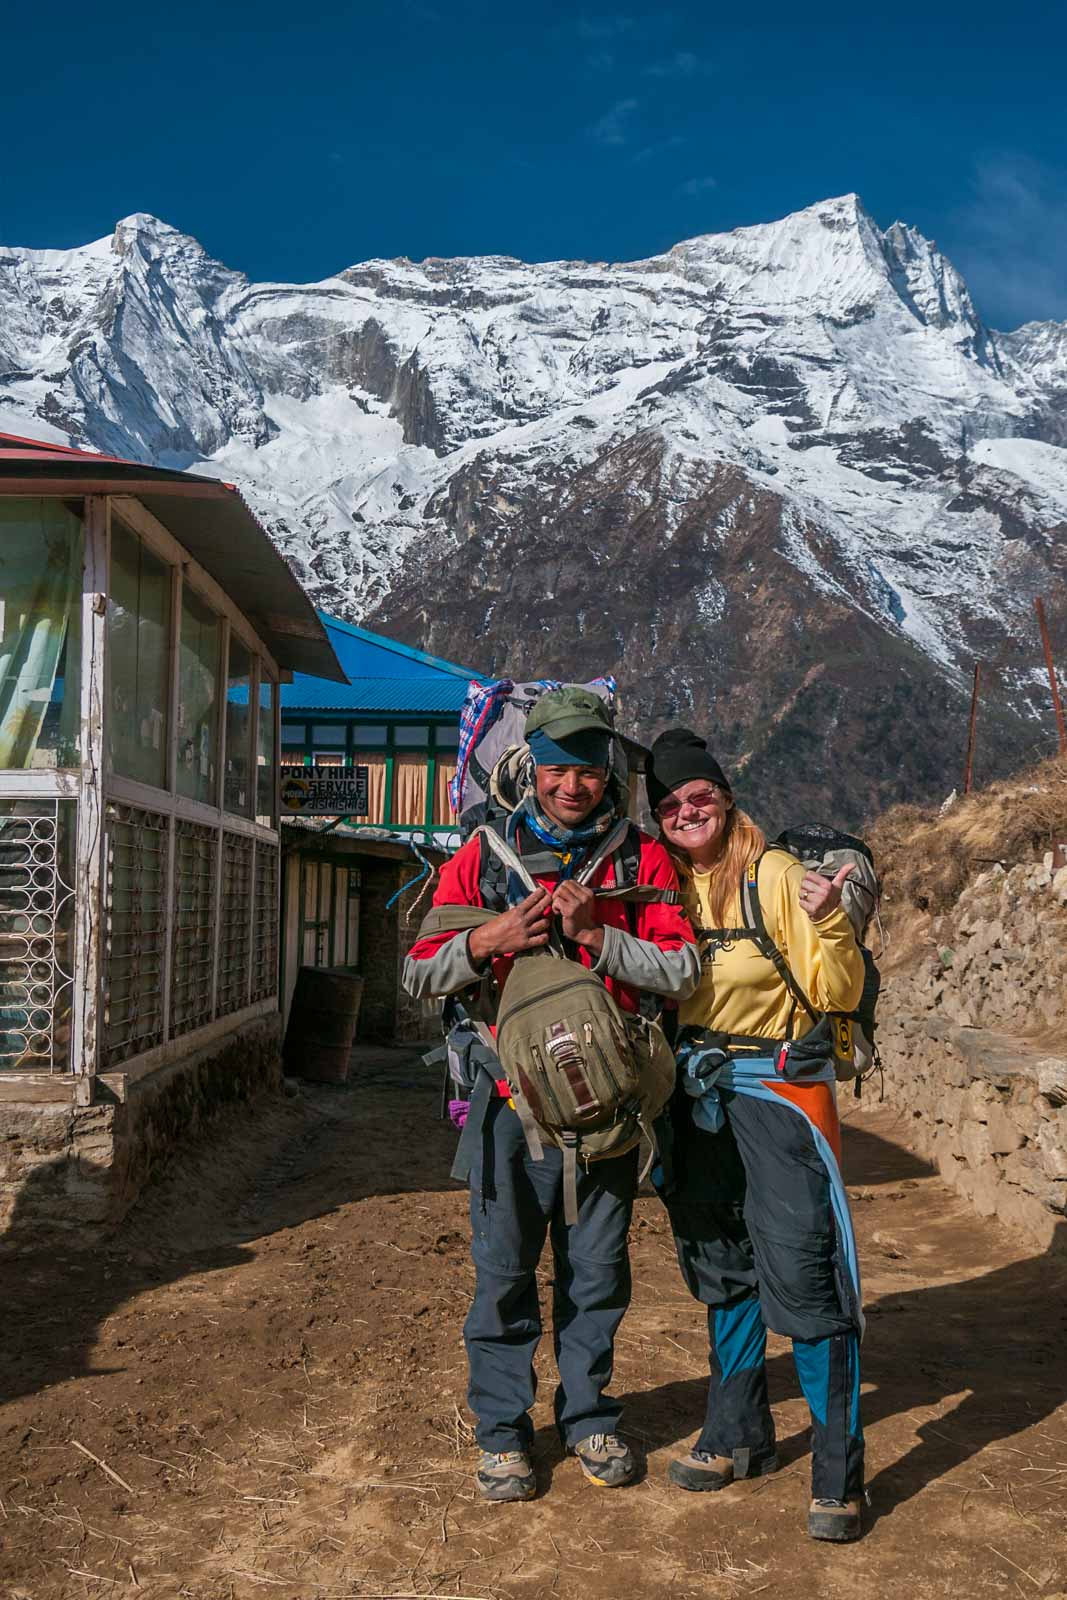 What to pack for the Everest Base Camp Trek